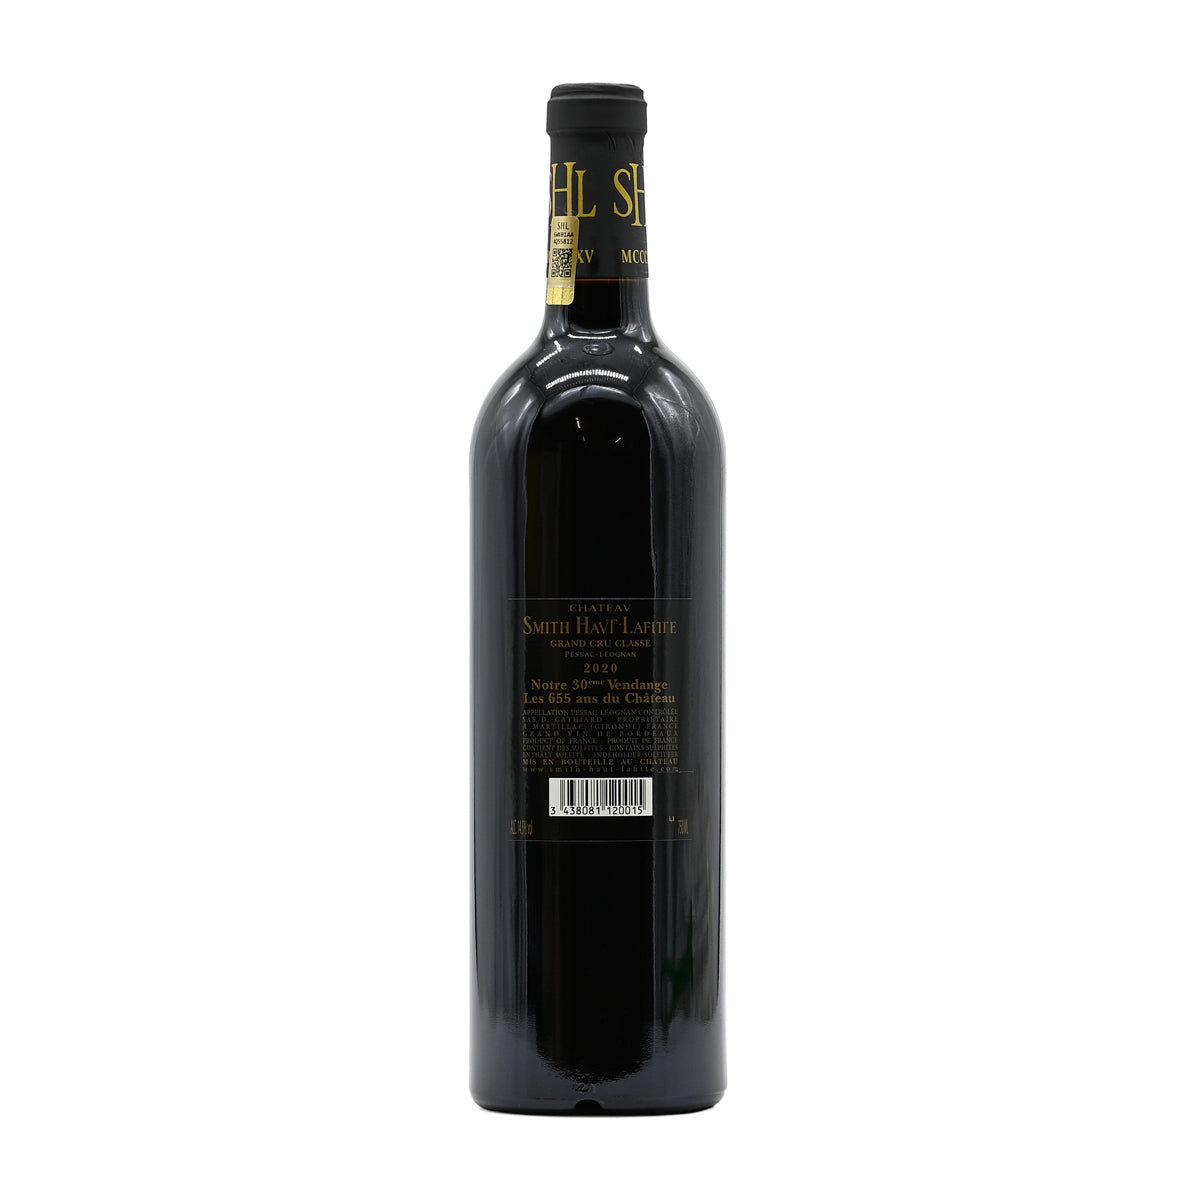 Chateau Smith Haut Lafitte Rouge 2020, 750ml French red wine, made from a blend of Cabernet Sauvignon, Merlot, Cabernet Franc, and Petit Verdot; from Pessac Leognan, Bordeaux, France – GDV Fine Wines, Hong Kong